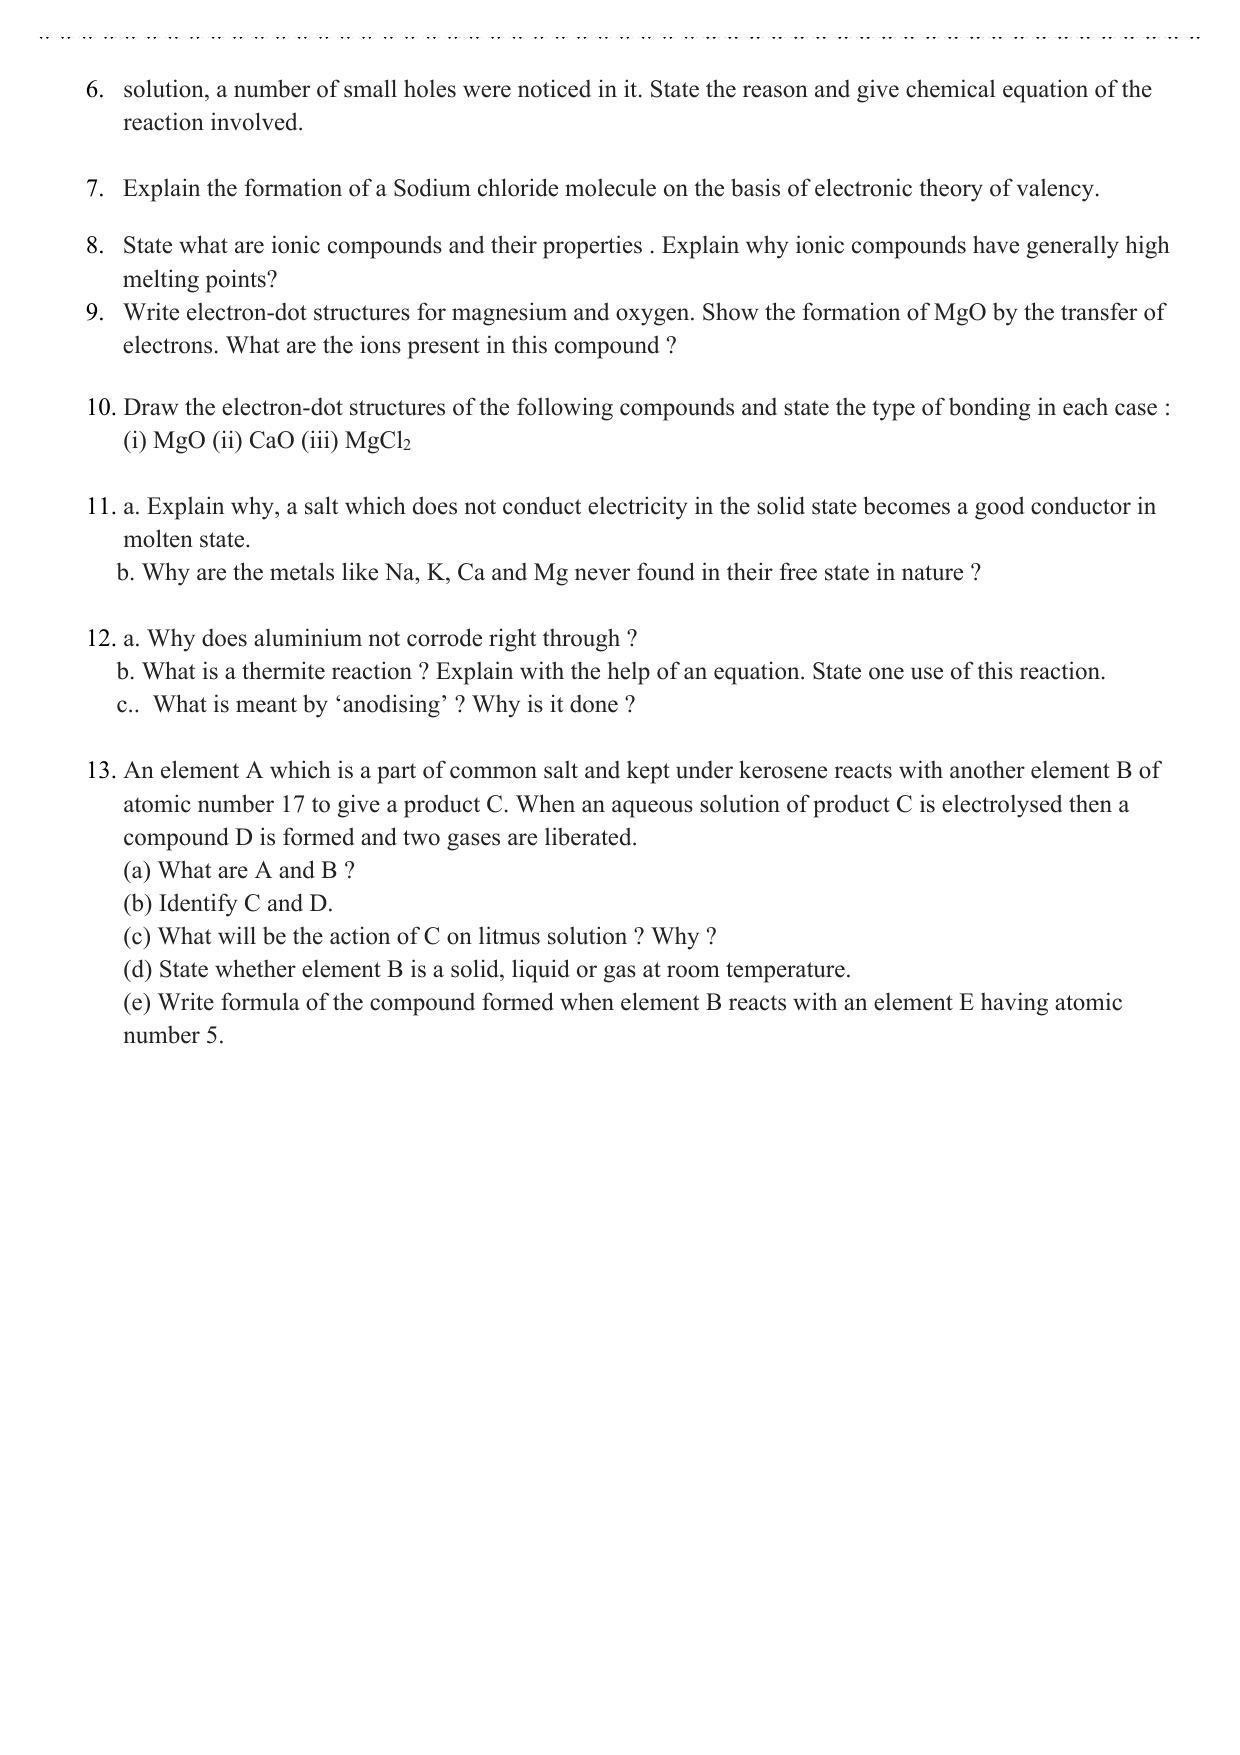 Edudel Class 10 Science Question Bank - Page 17